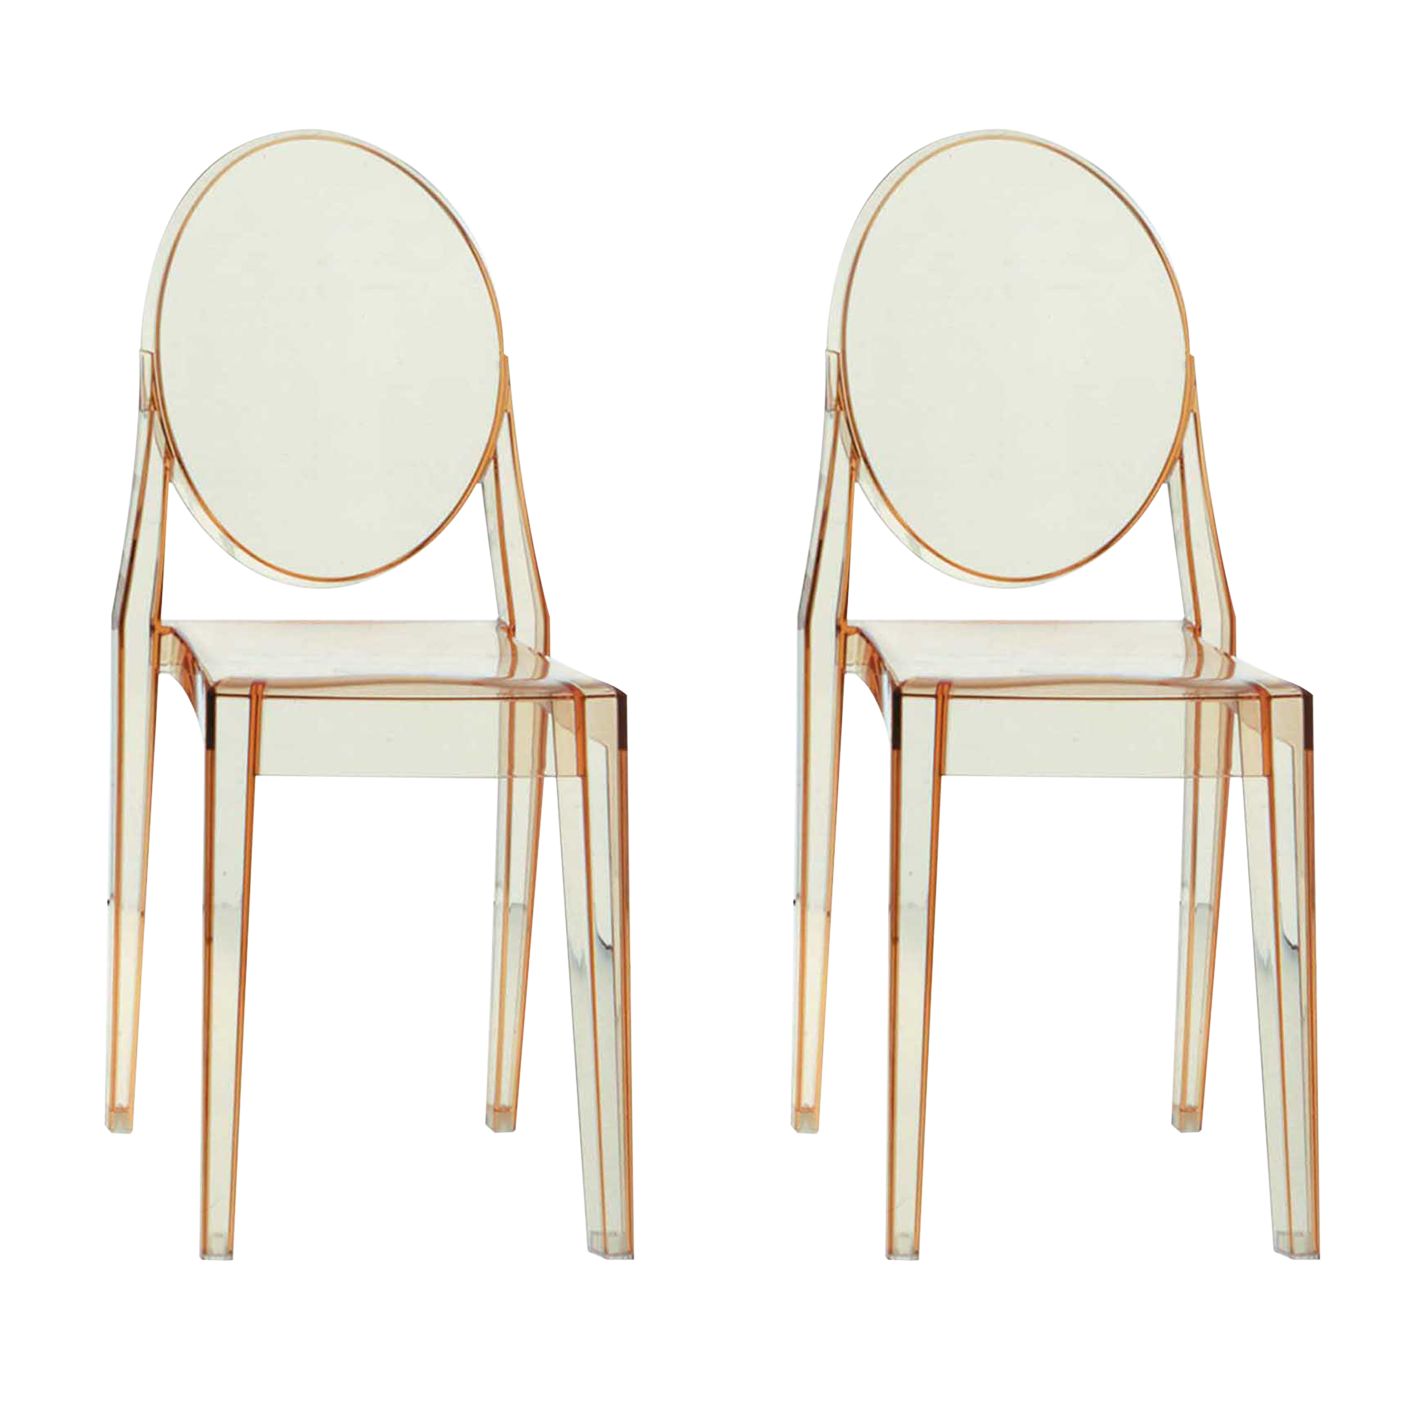 Philippe Starck for Kartell Victoria Ghost Chair, Rose, Pair at John Lewis